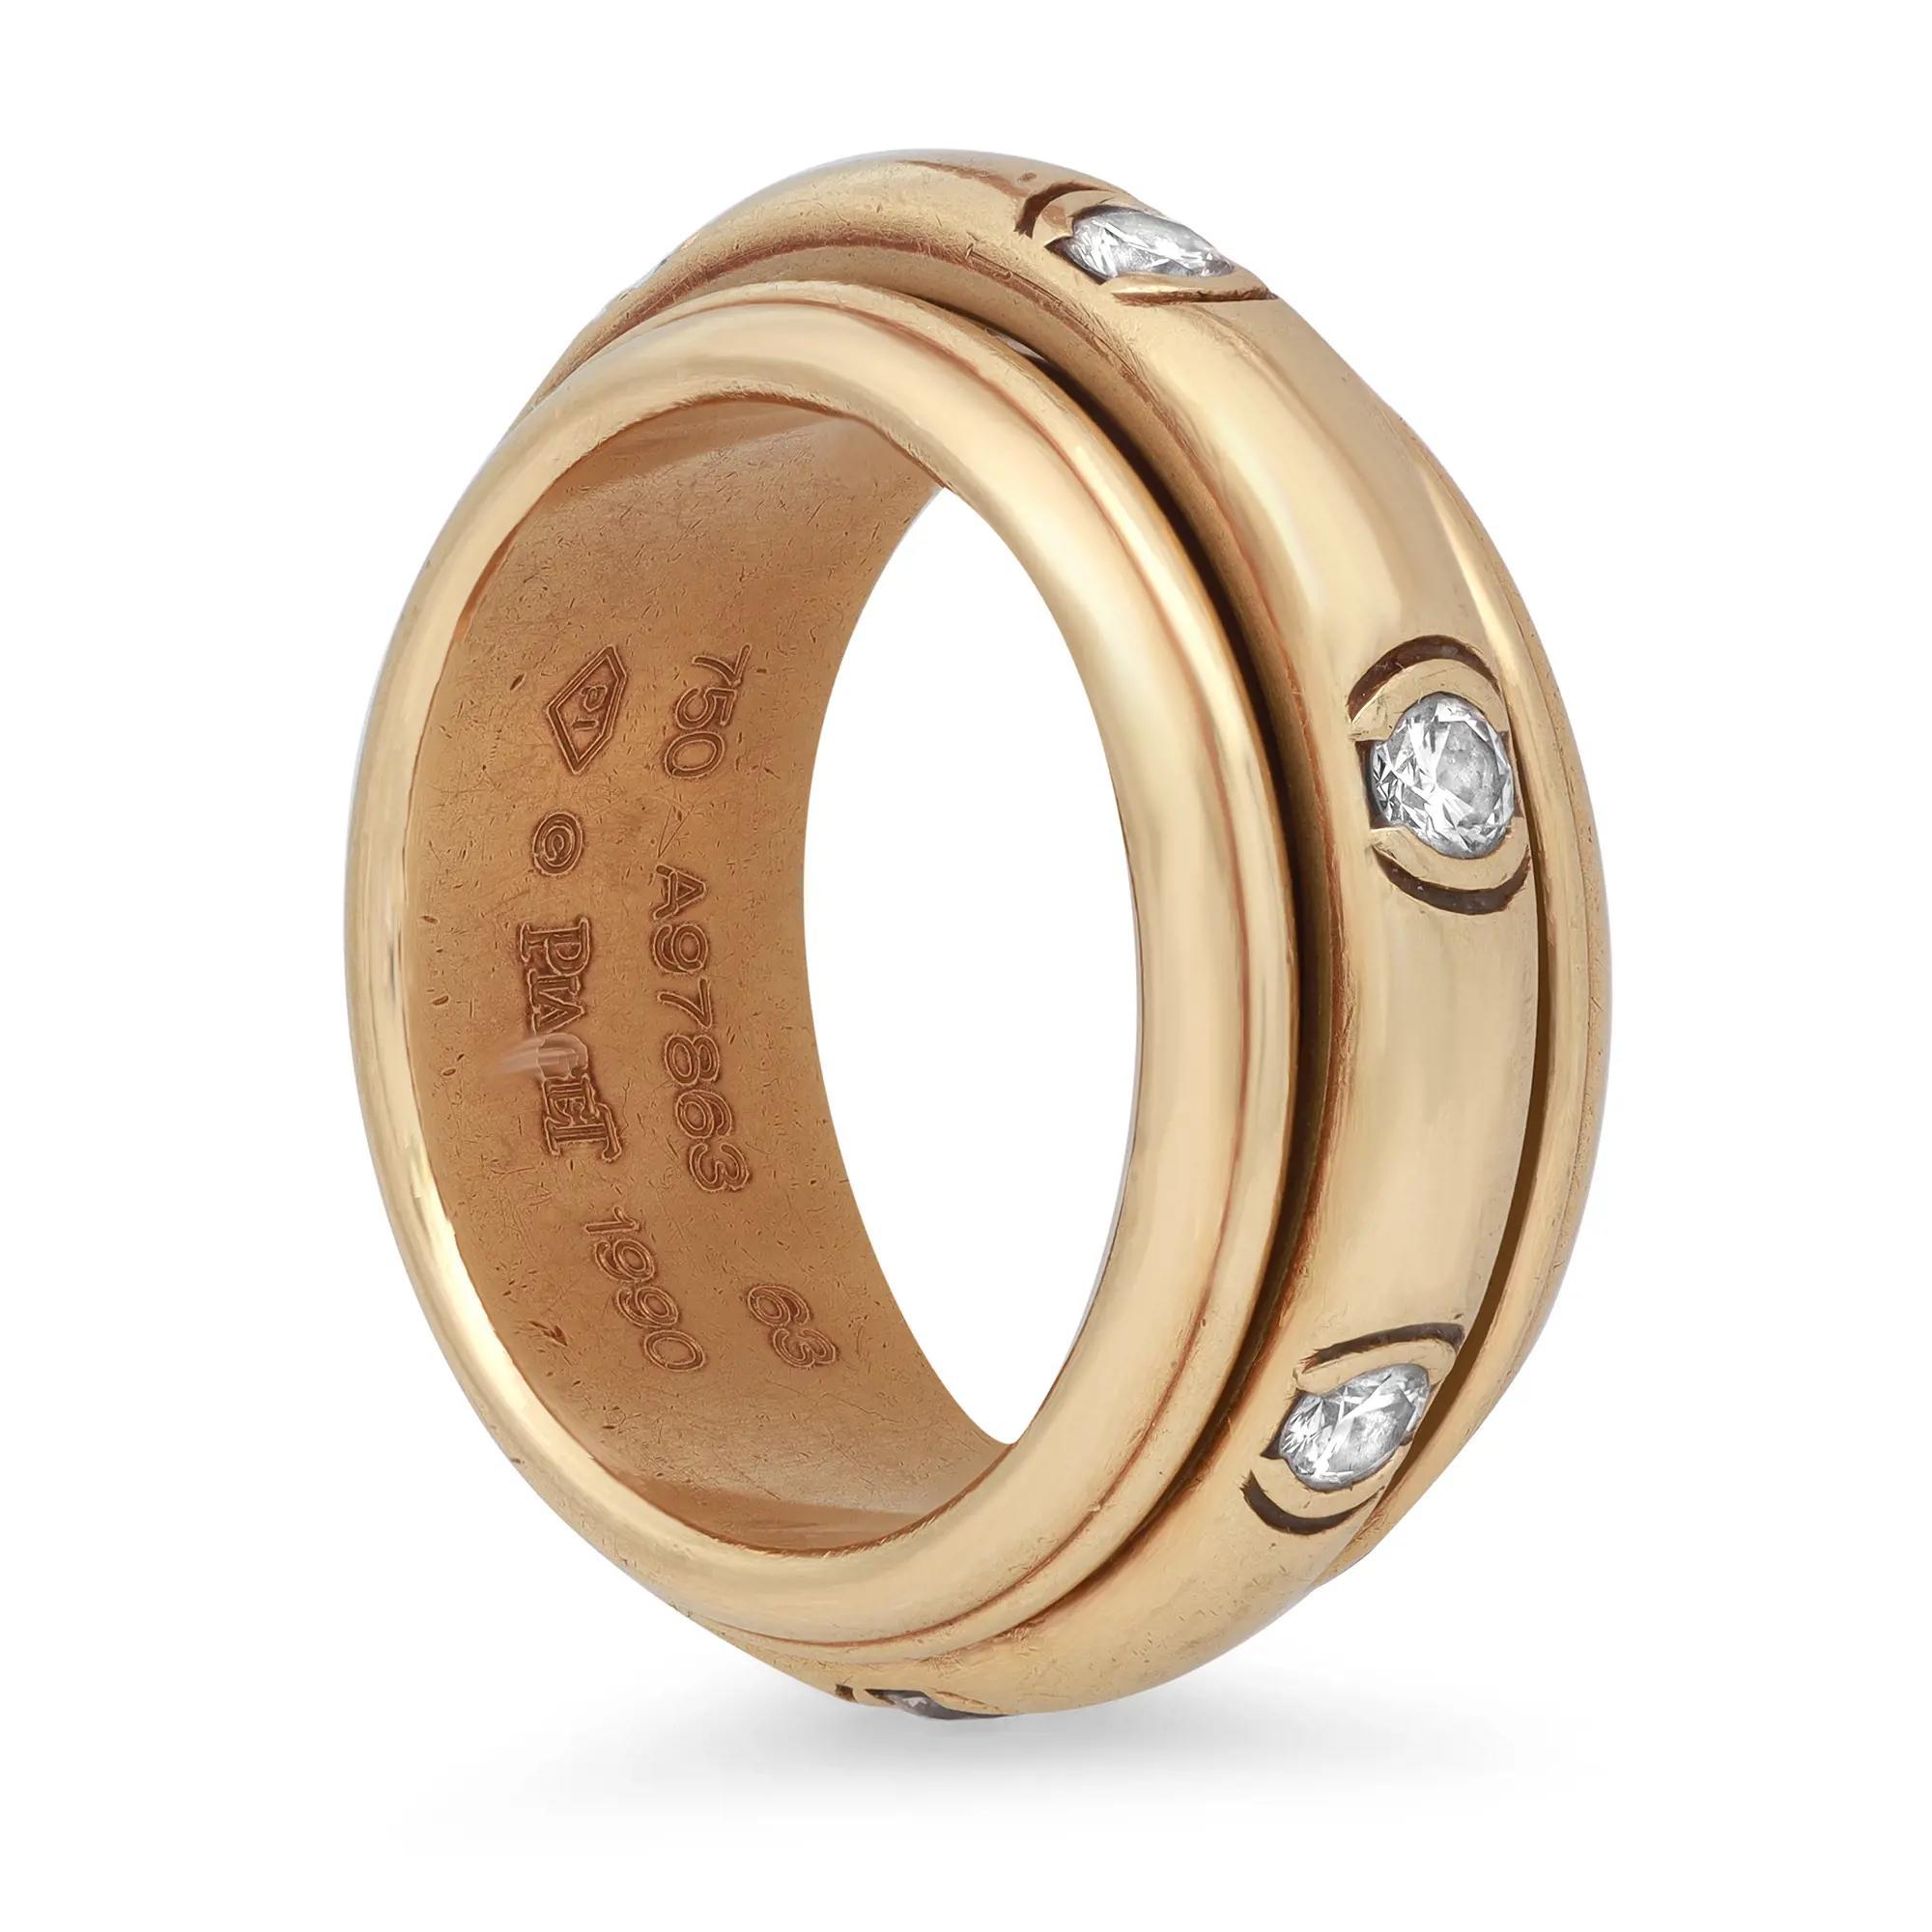 Piaget Possession diamond band ring. Crafted in fine 18K yellow gold. This ring features a wide band with a center moving band ring encrusted with 7 round brilliant cut diamonds weighing 1.05 carats approx. Signed Piaget. Date of manufacture 1990.